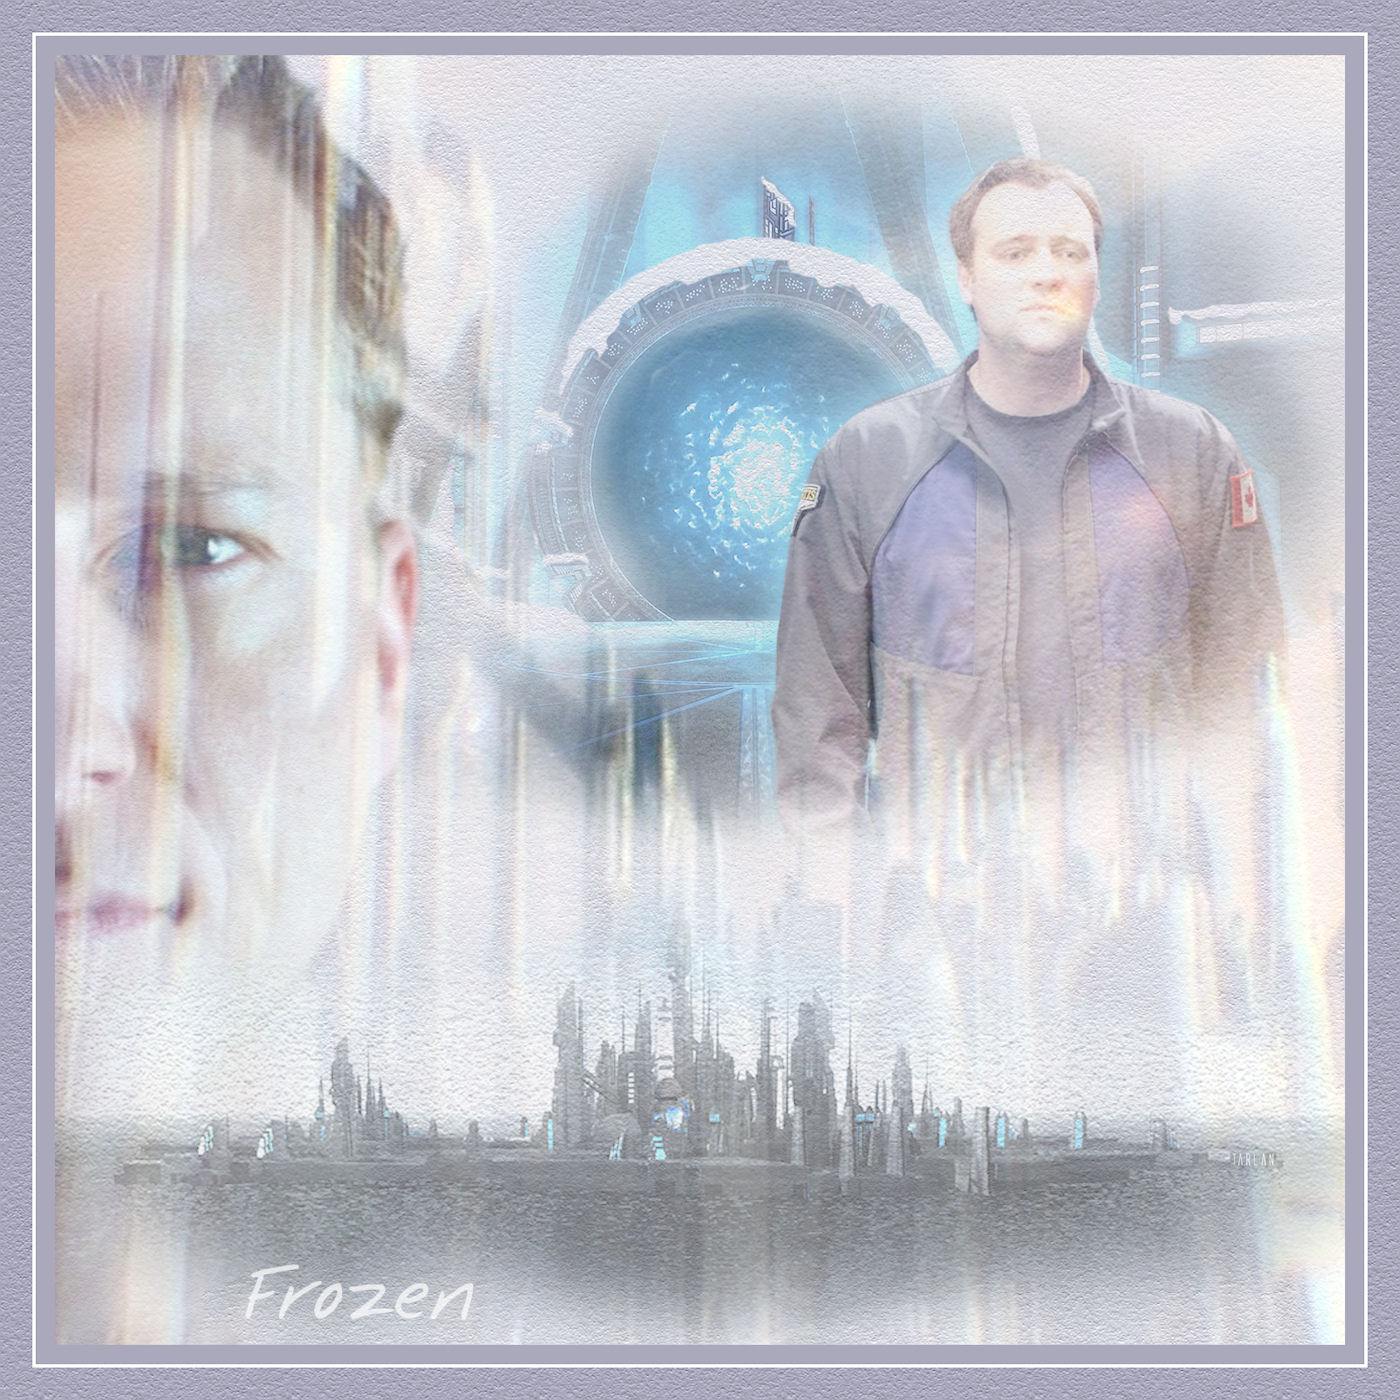 Frozen 1 by Tarlan
Created for an aborted Season 6 project
Keywords: stargate_atlantis_art;